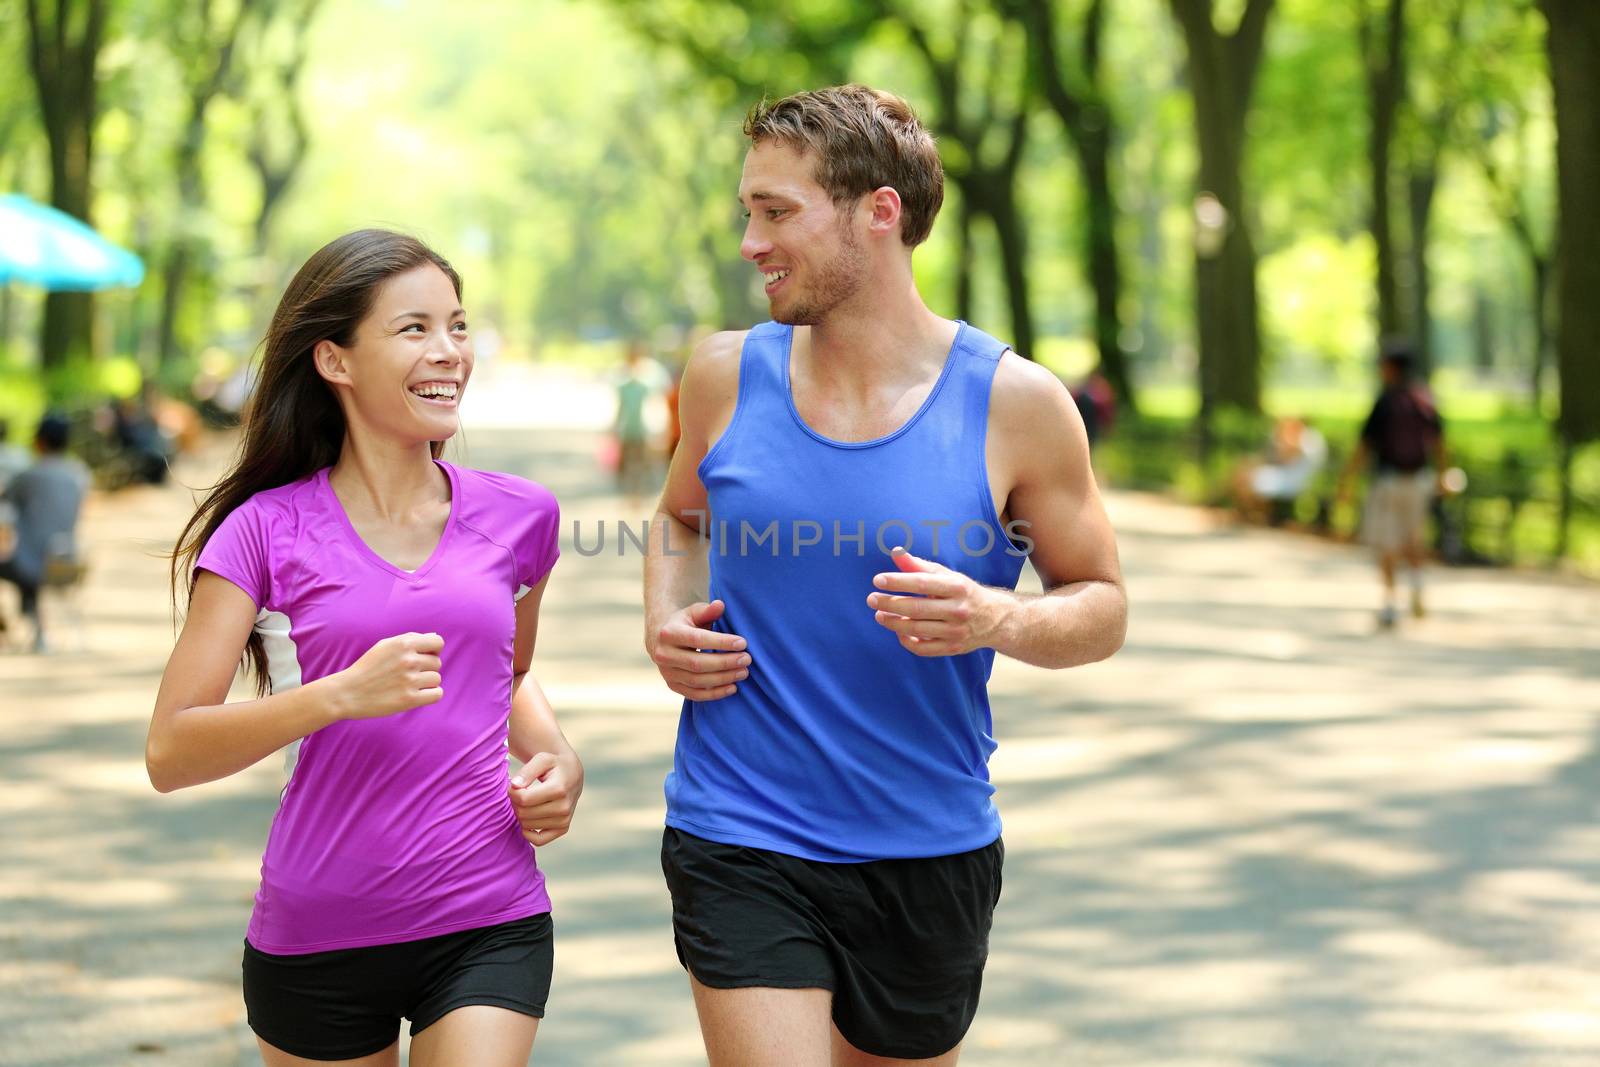 Running couple training in Central Park, New York City (NYC). Happy runners talking together during run on famous Mall walk path under trees in Manhattan, urban fitness.